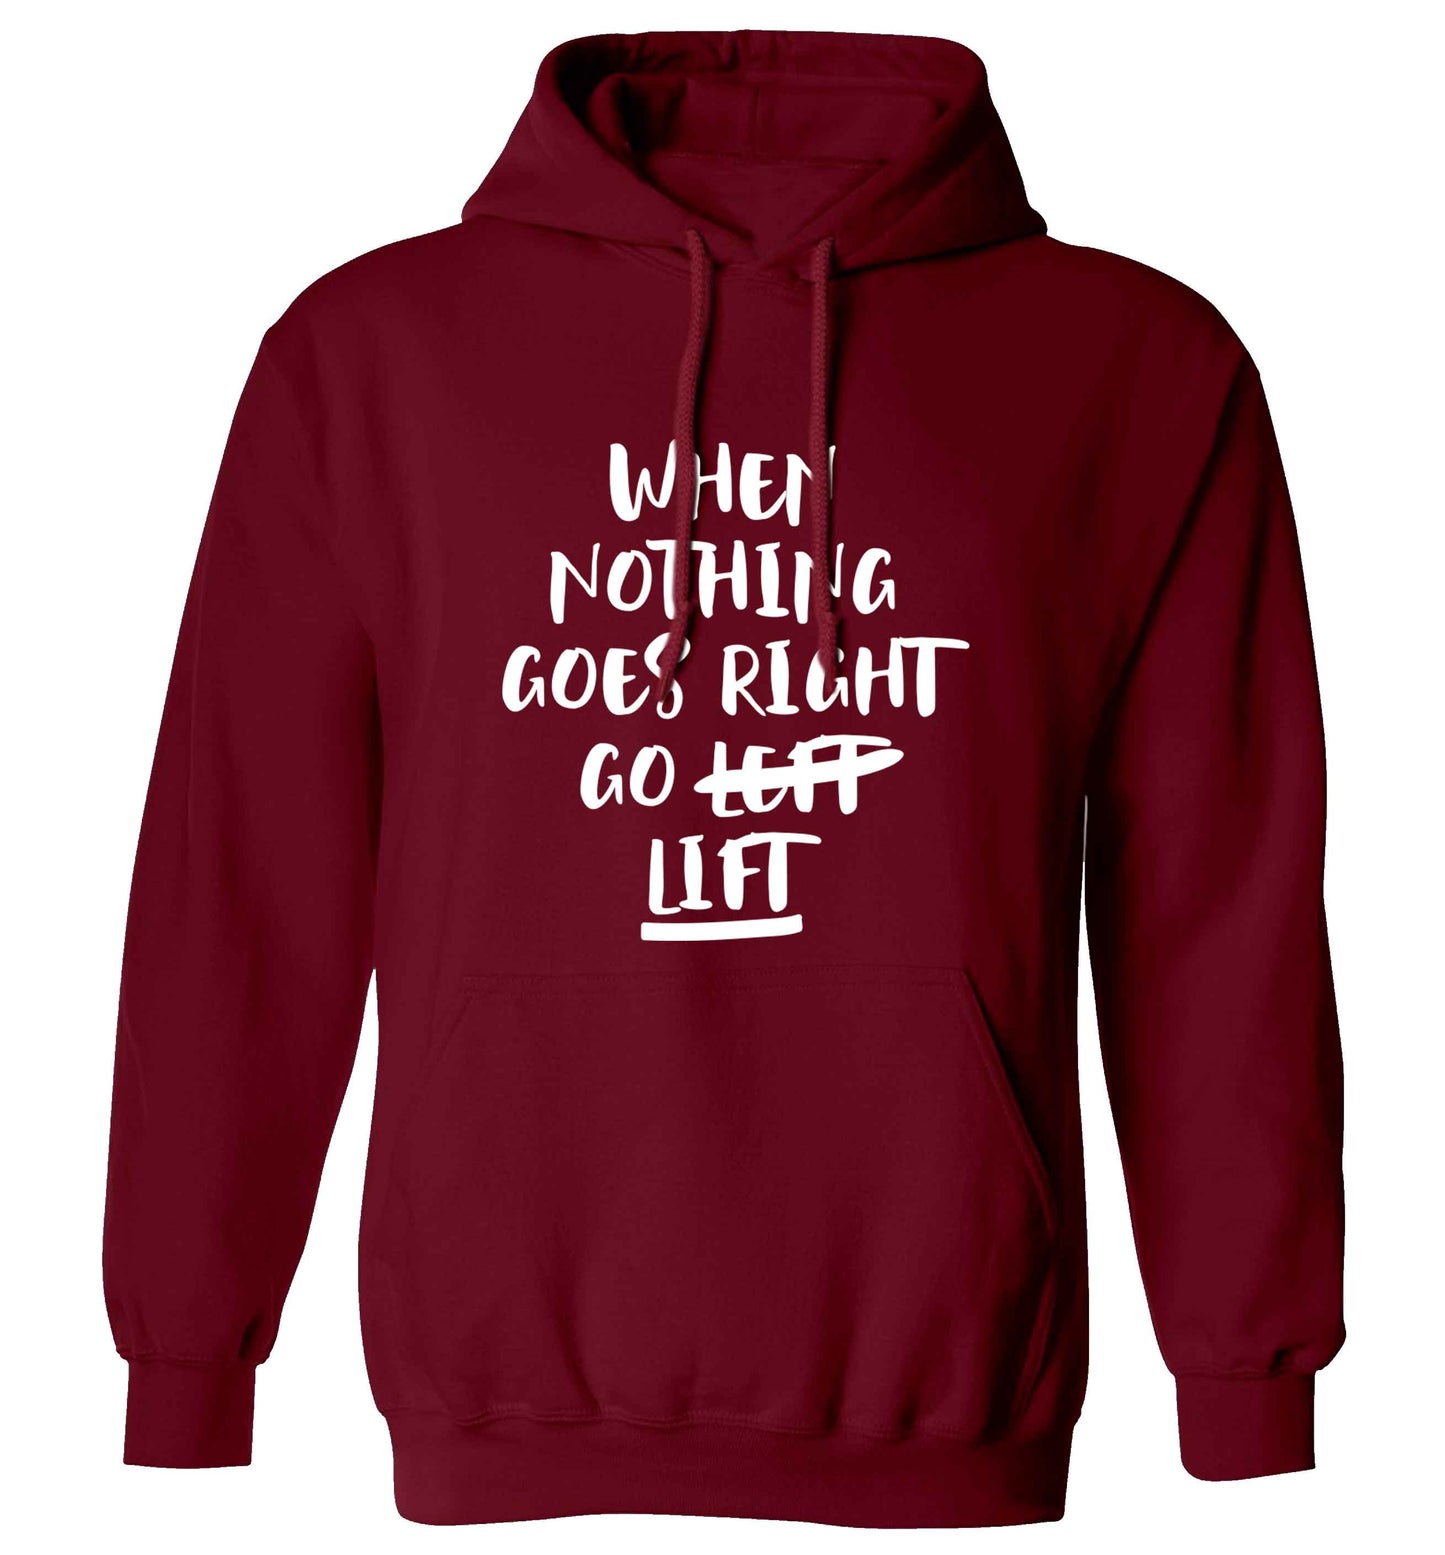 When nothing goes right go lift adults unisex maroon hoodie 2XL